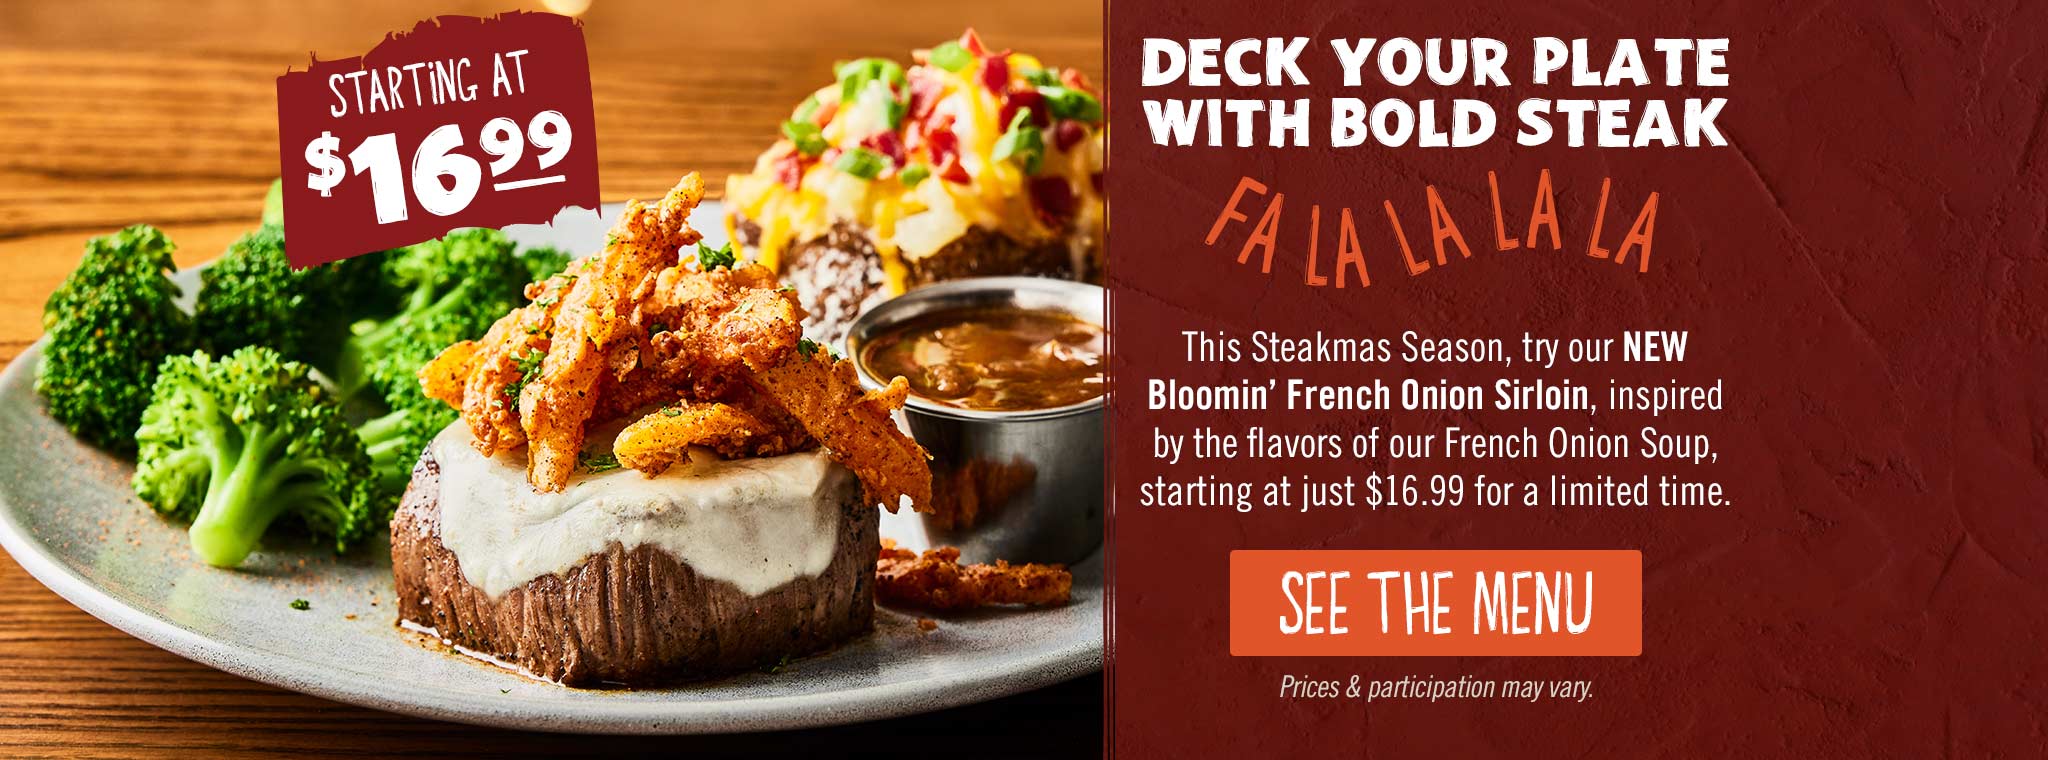 Deck Your Plate With Bold Steak. This SteakMas Season, try our NEW Bloomin' French Onion Sirloin, inspired by the flavors of our French Onion Soup, starting at just $16.99 for a limited time. SEE THE MENU. Price & participation may vary.